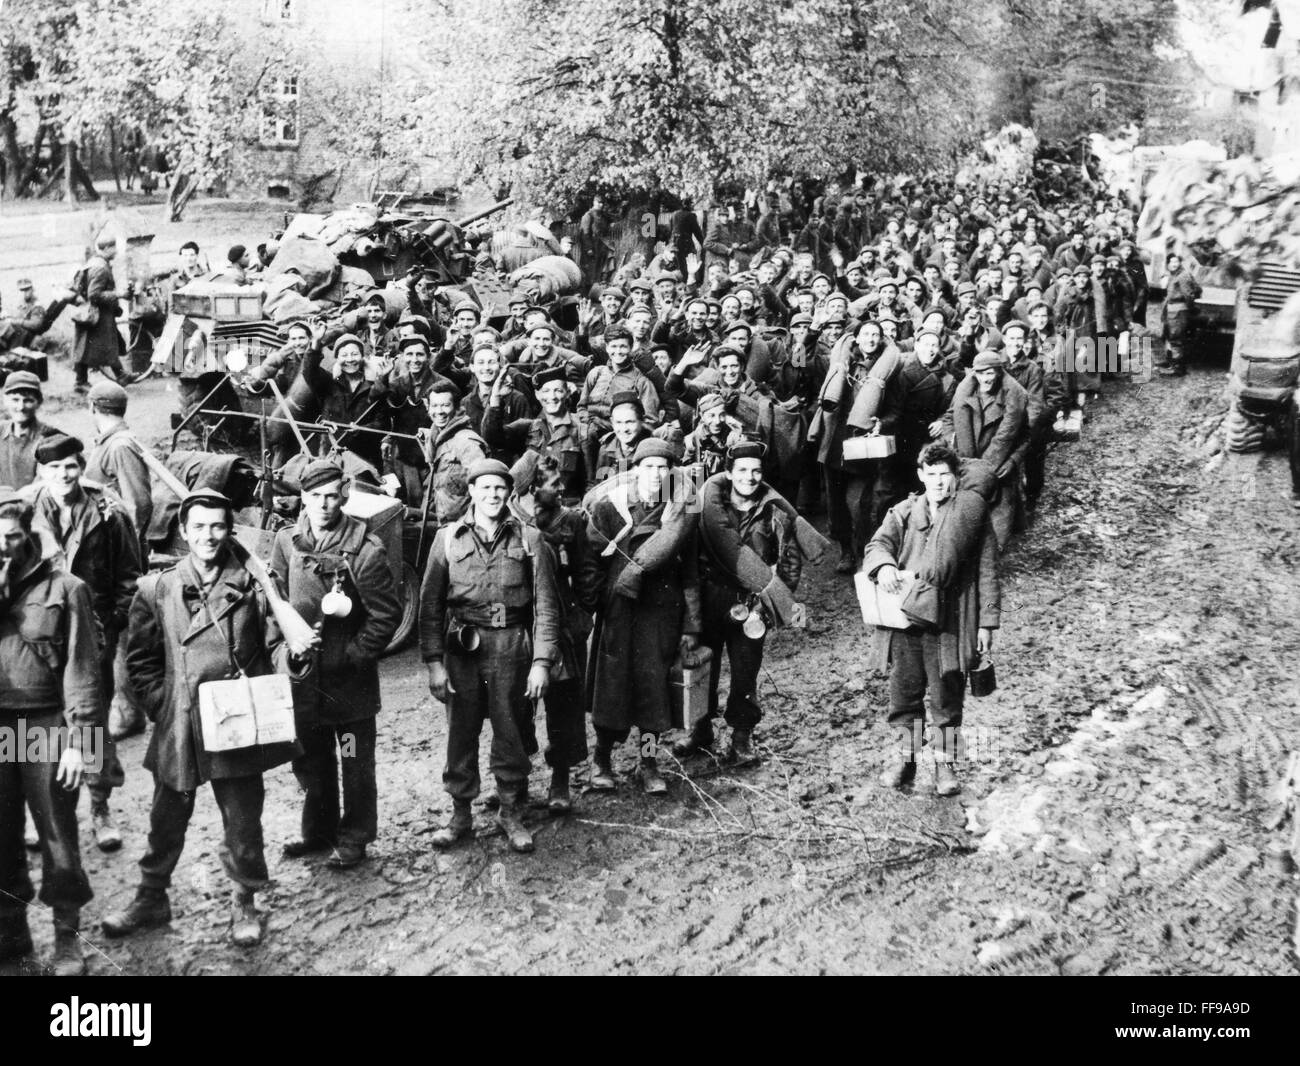 WORLD WAR II: PRISONERS. /nAmerican prisoners of war liberated by the British Army from a prison camp near Gudow, Germany, 1945. Stock Photo